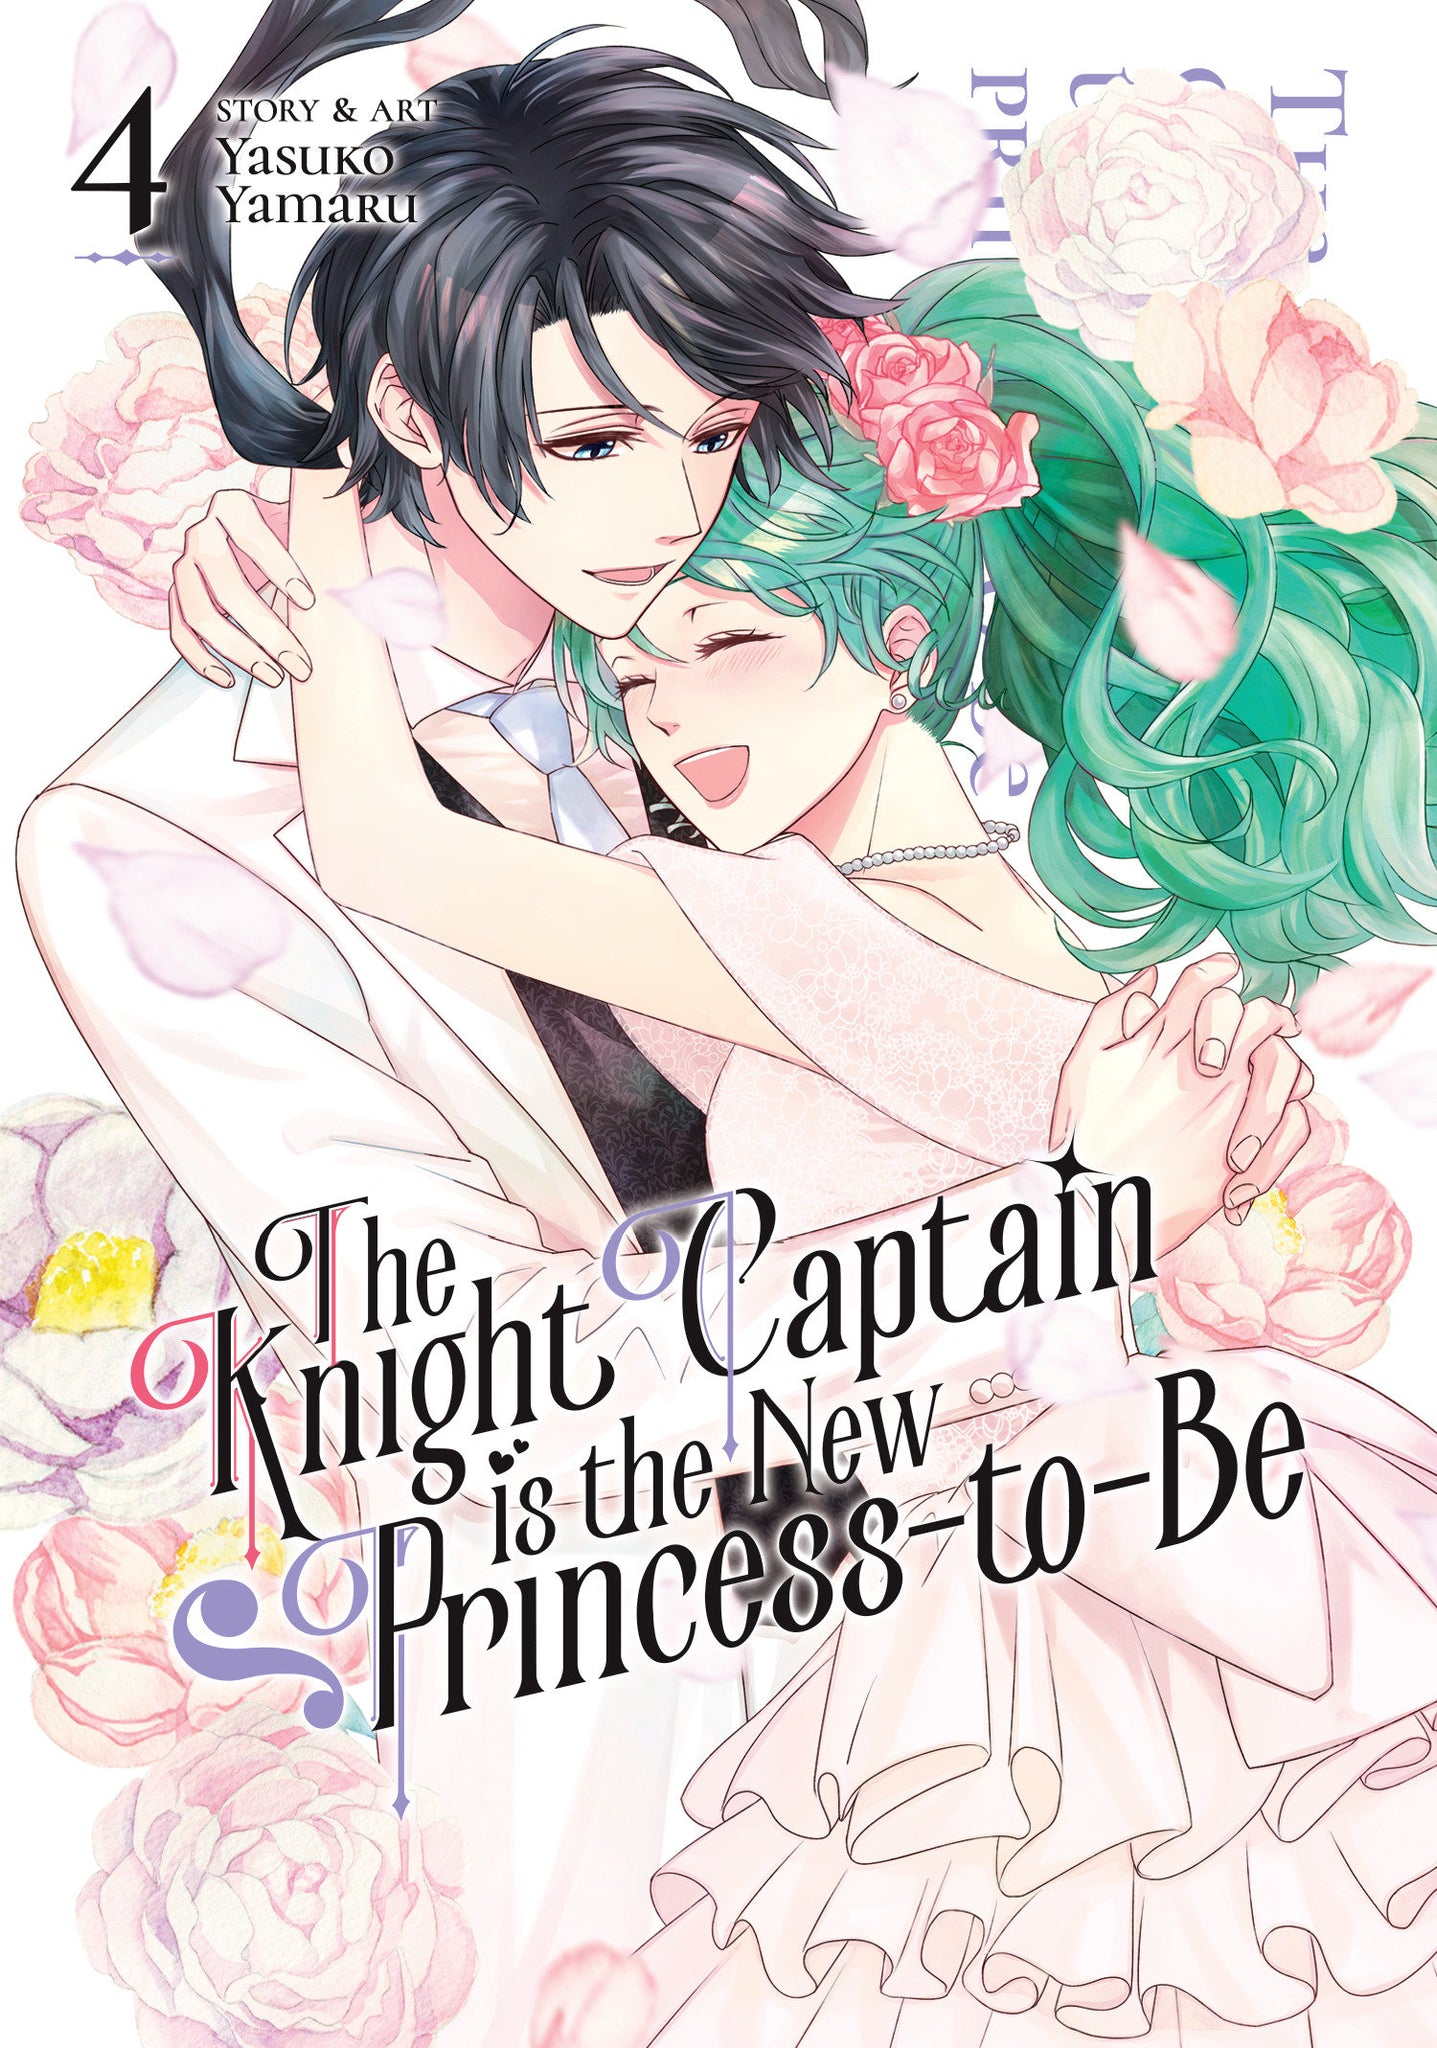 THE KNIGHT CAPTAIN IS THE NEW PRINCESS-TO-BE VOL 4 (8/7/24) PRESALE